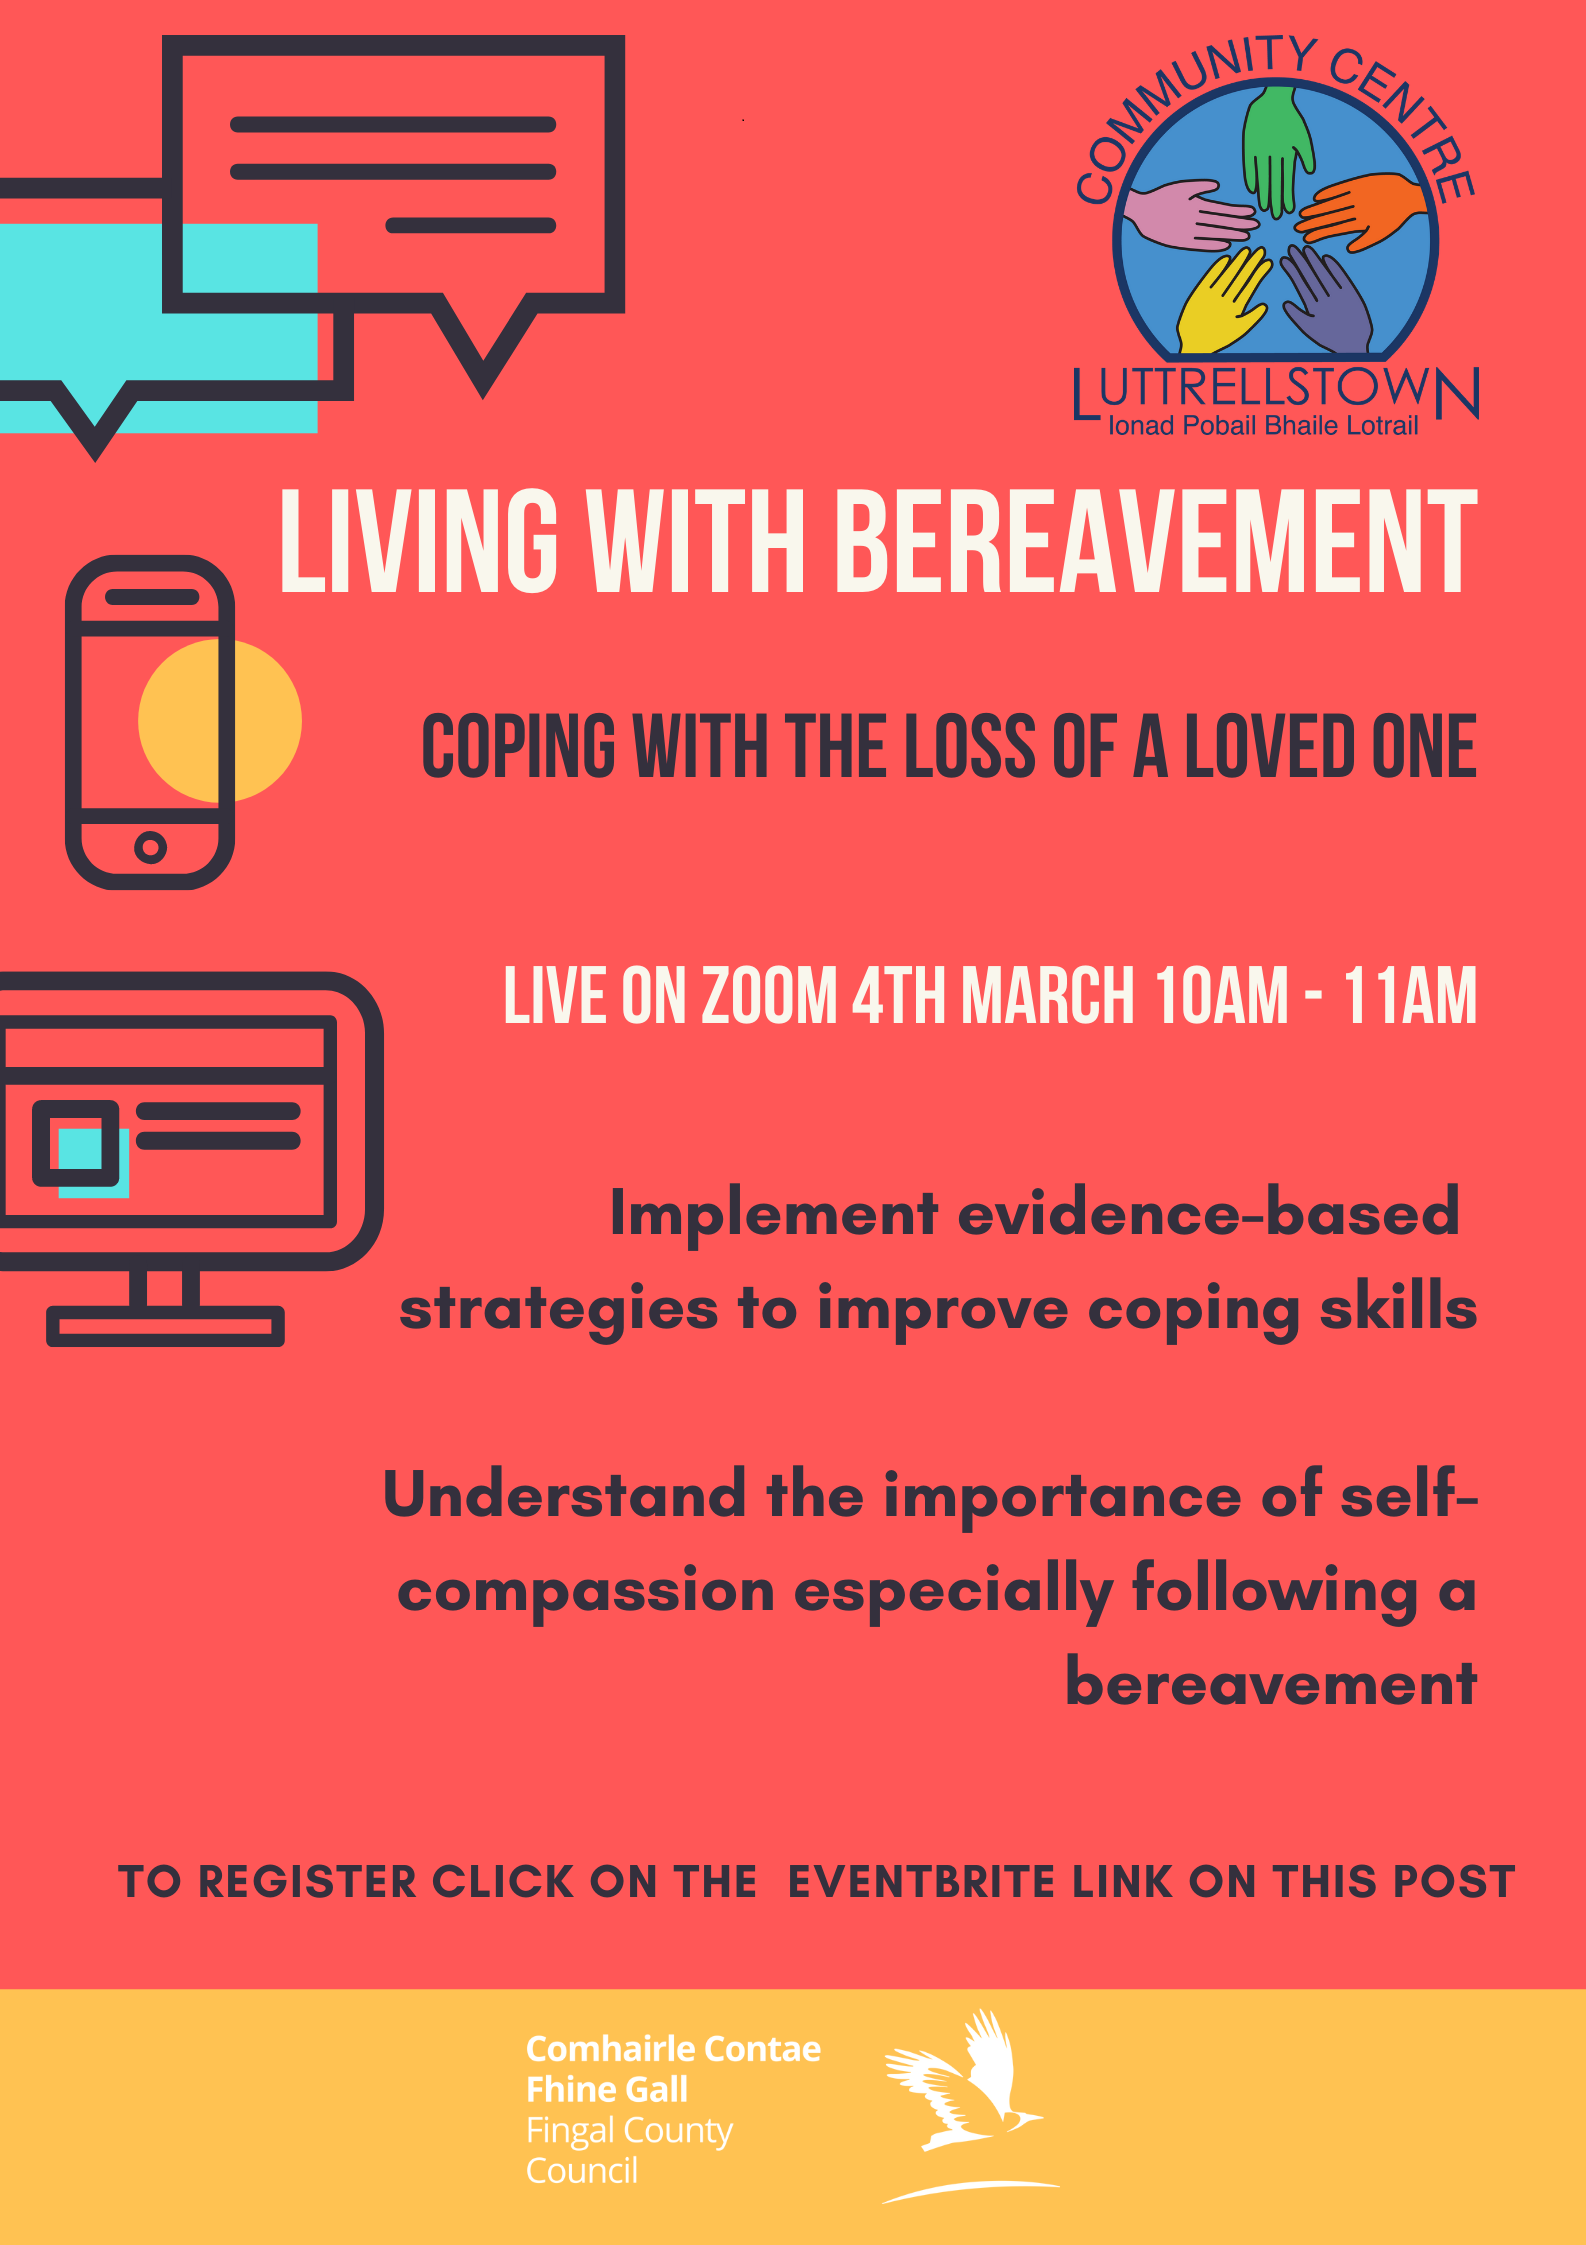 Luttrelstown - Coping with Bereavement